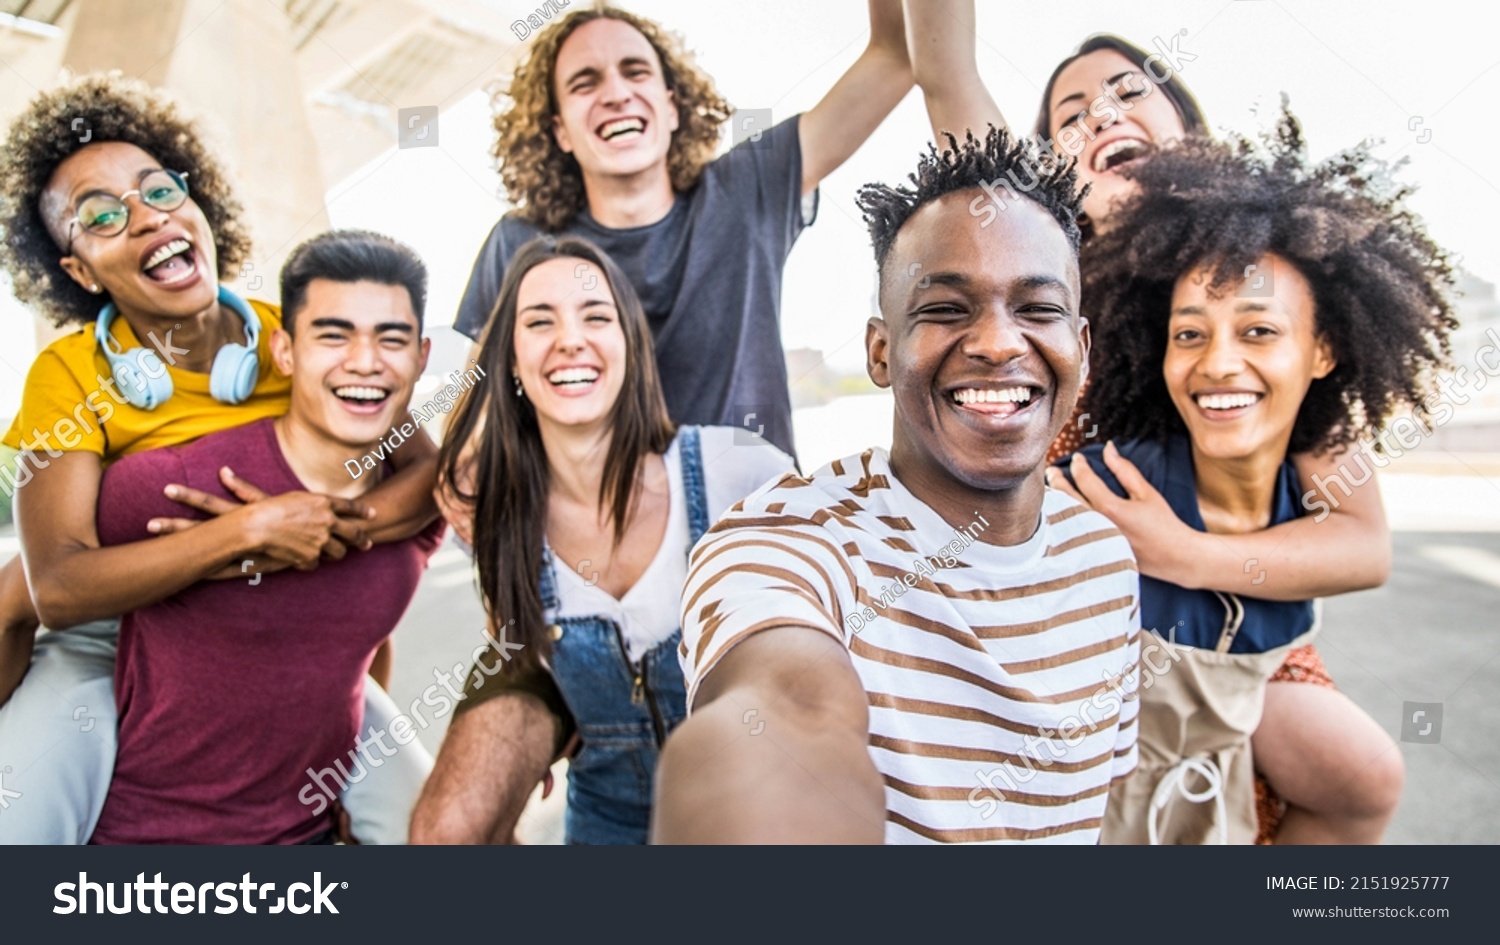 Group multiracial friends taking selfie picture with mobile smartphone outside - Happy young with hands up laughing at camera - Youth concept with guys and girls having fun walking on city street #2151925777